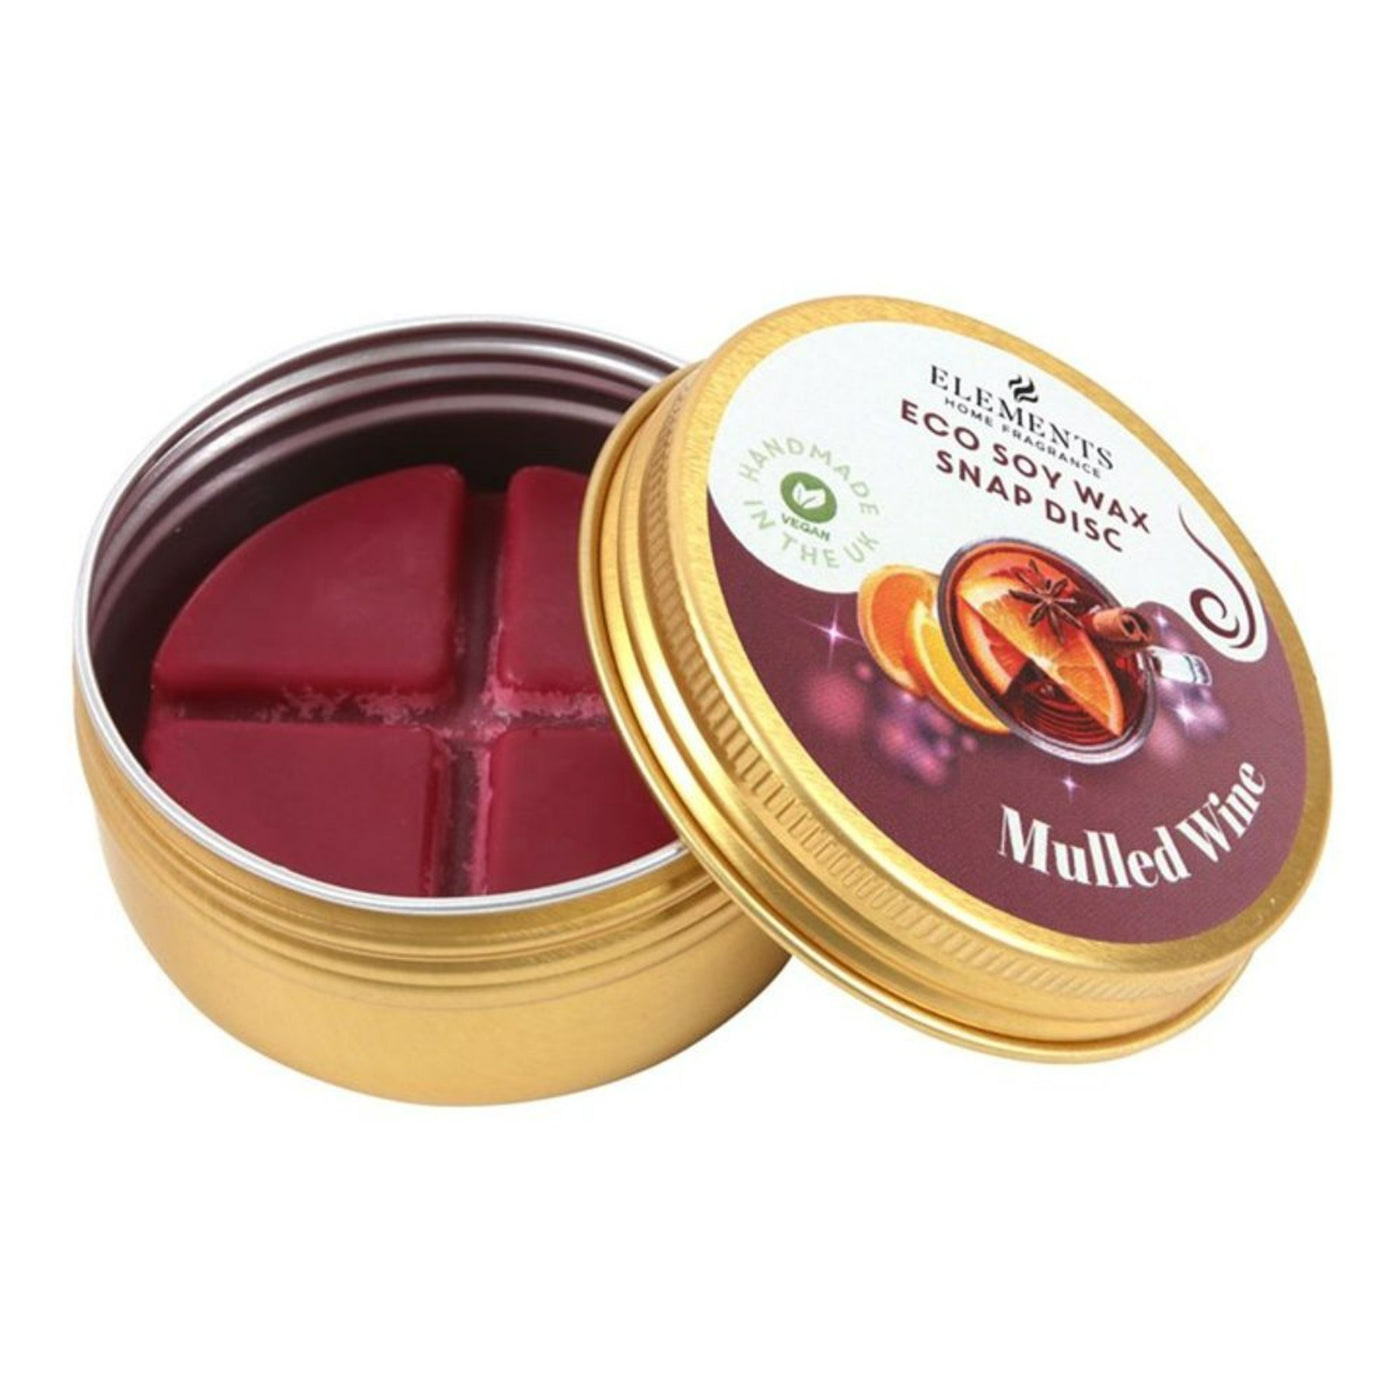 Mulled Wine Soy Wax Snap Disc In Metal Tin. 